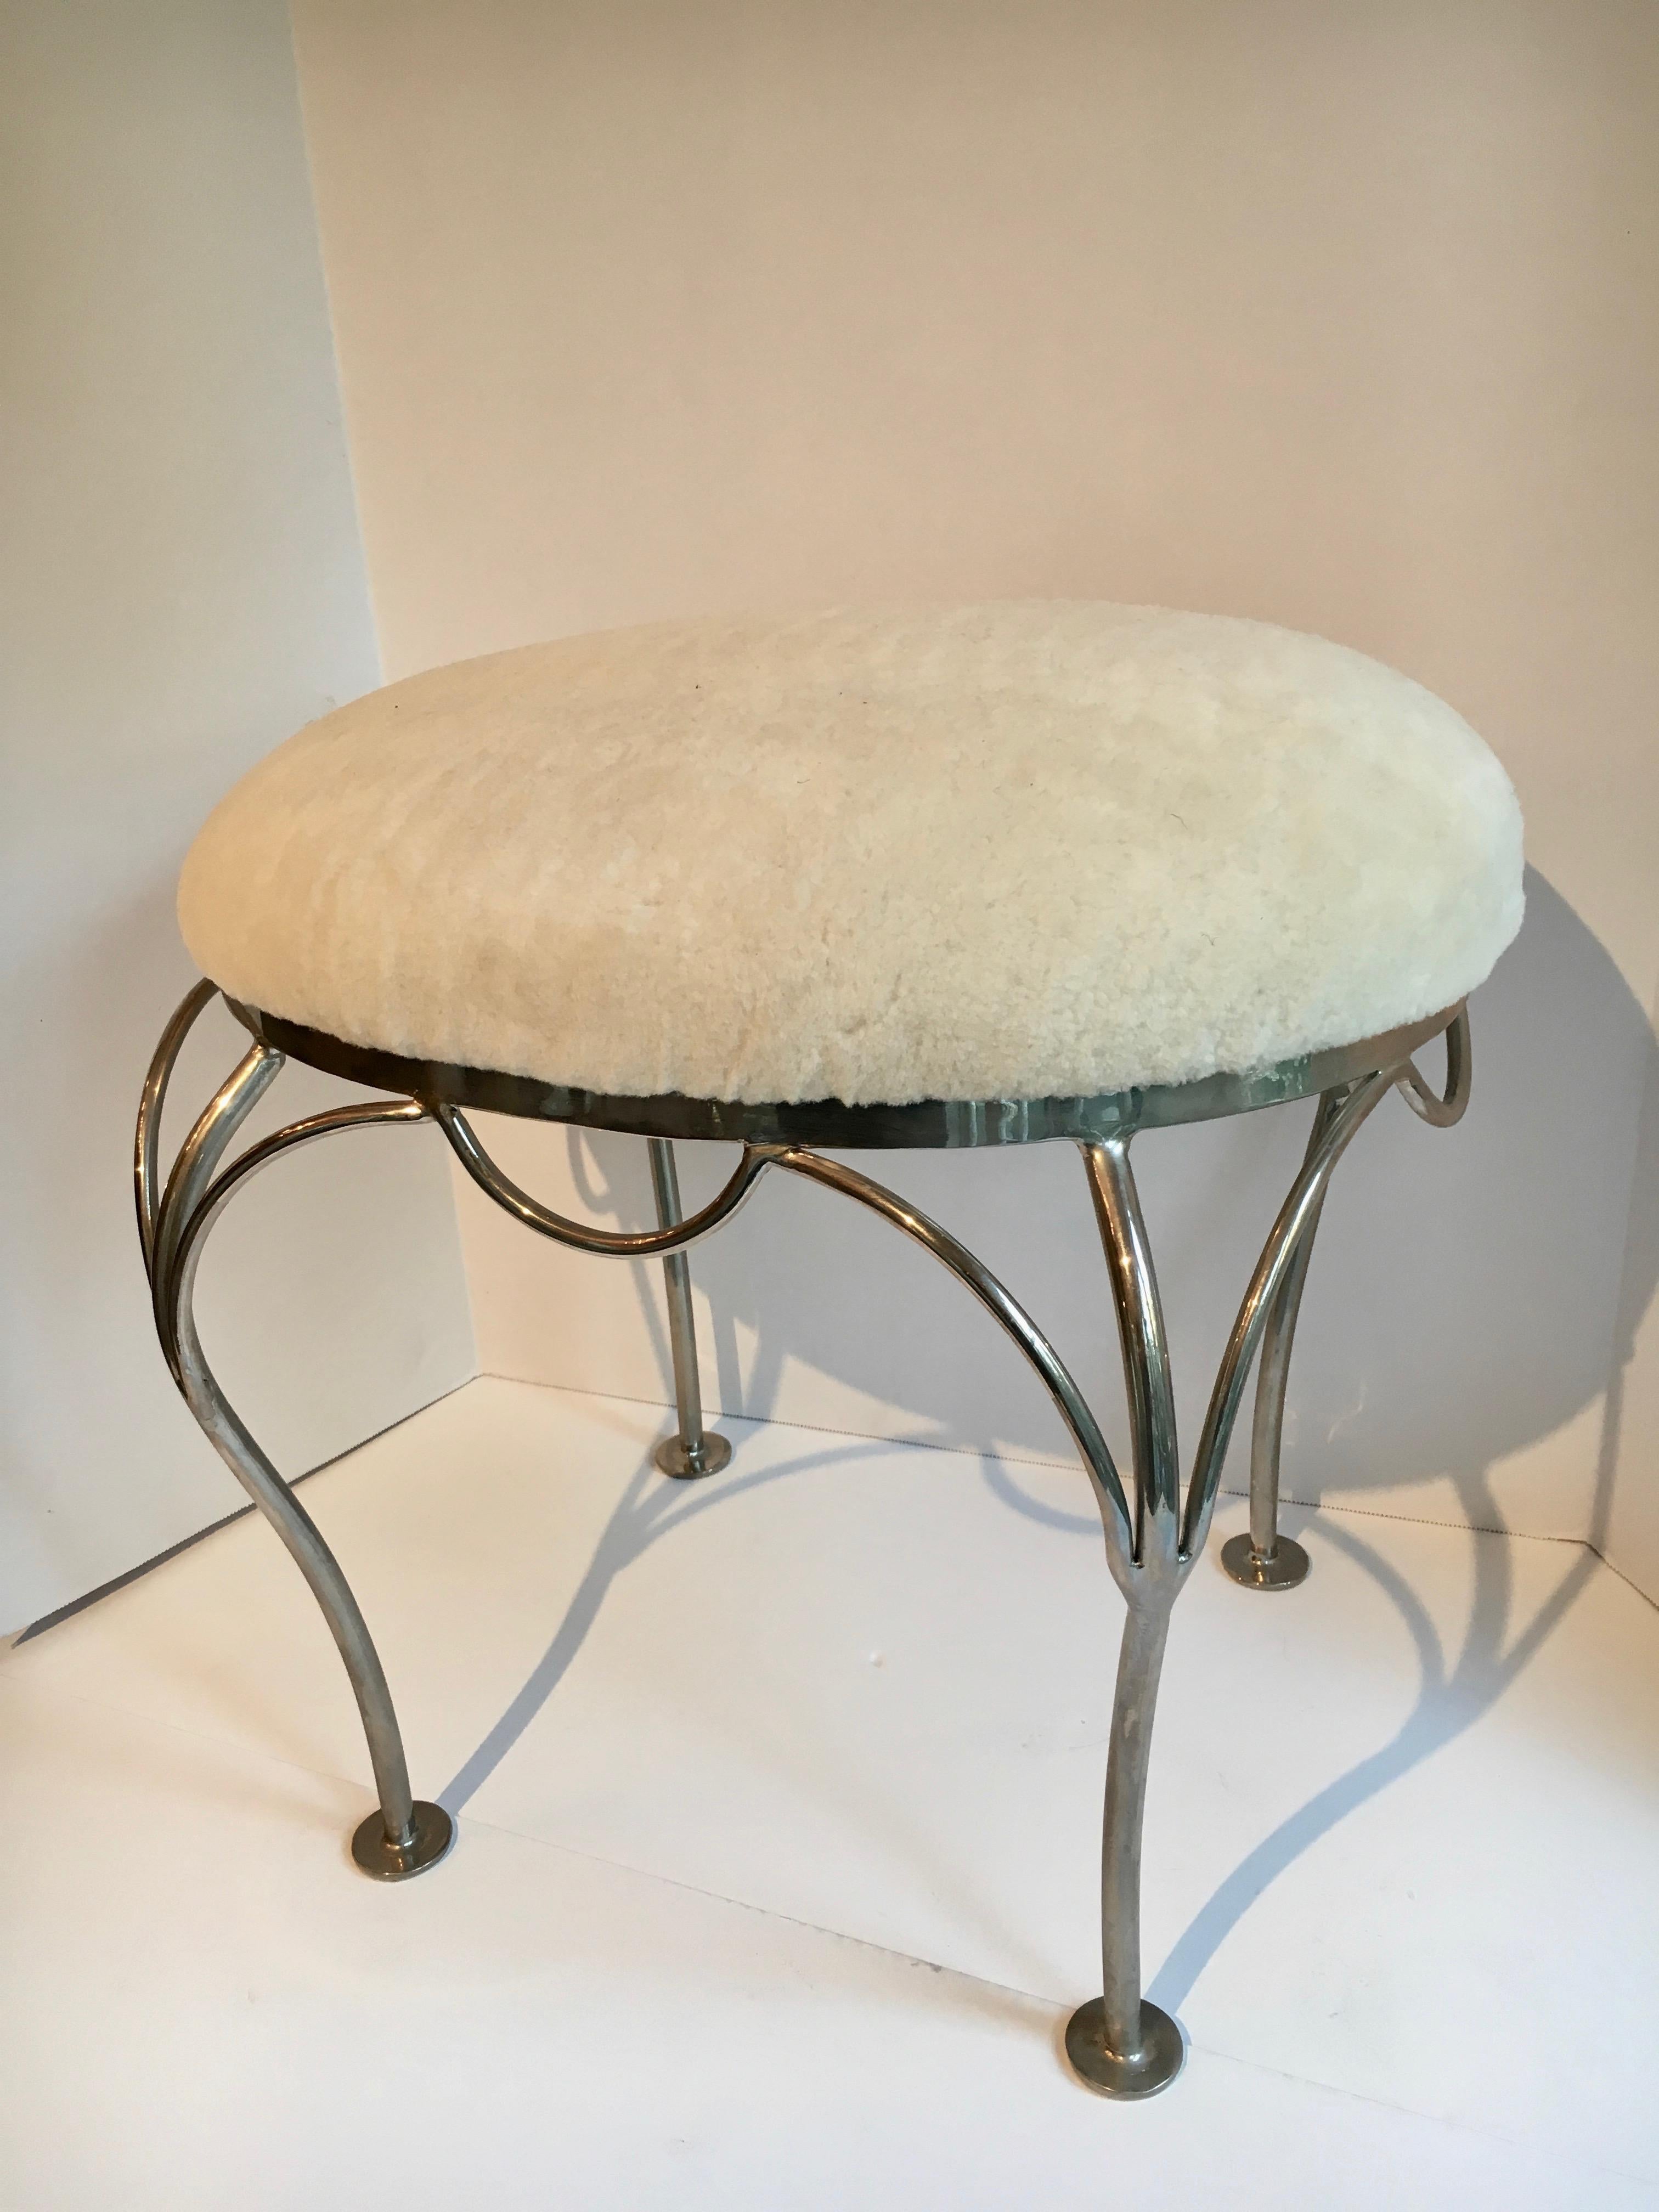 20th Century Nickel-Plated Vanity Stool with Shearling Seat